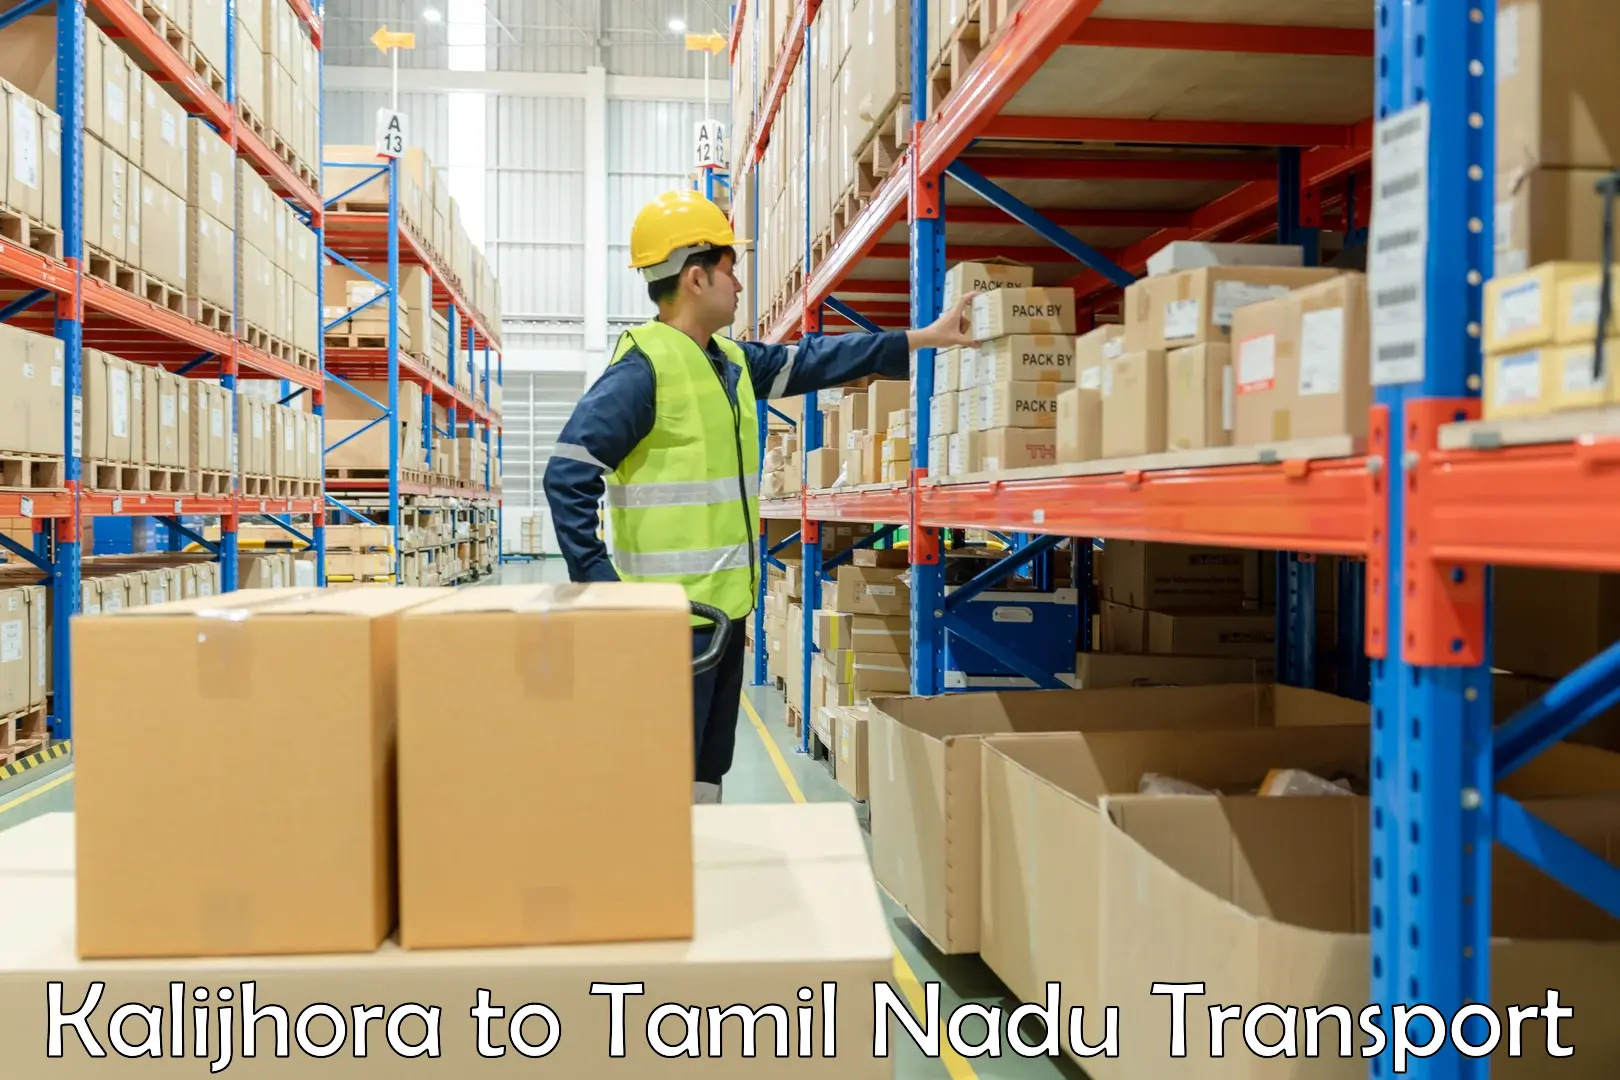 Logistics transportation services Kalijhora to Shanmugha Arts Science Technology and Research Academy Thanjavur